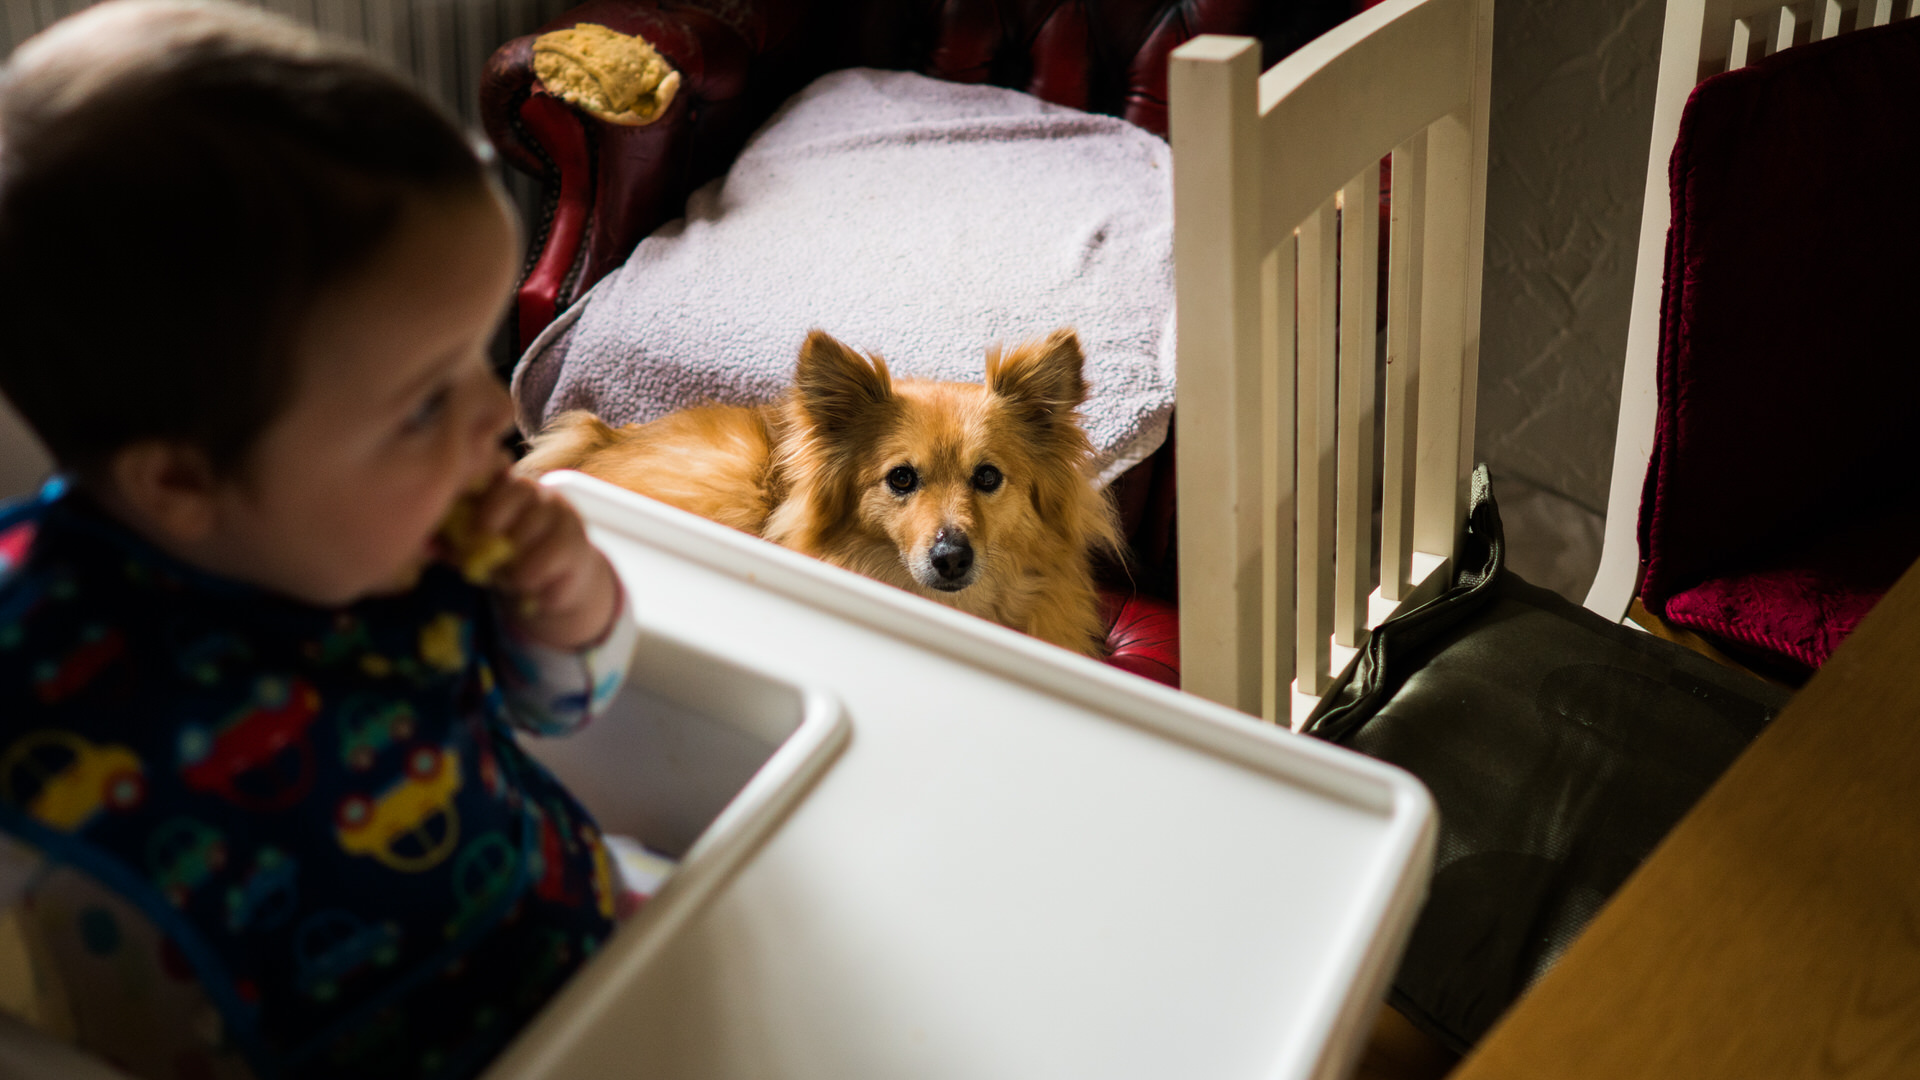 a dog sits and looks up at the babys high chair during breakfast at a family day in the life shoot